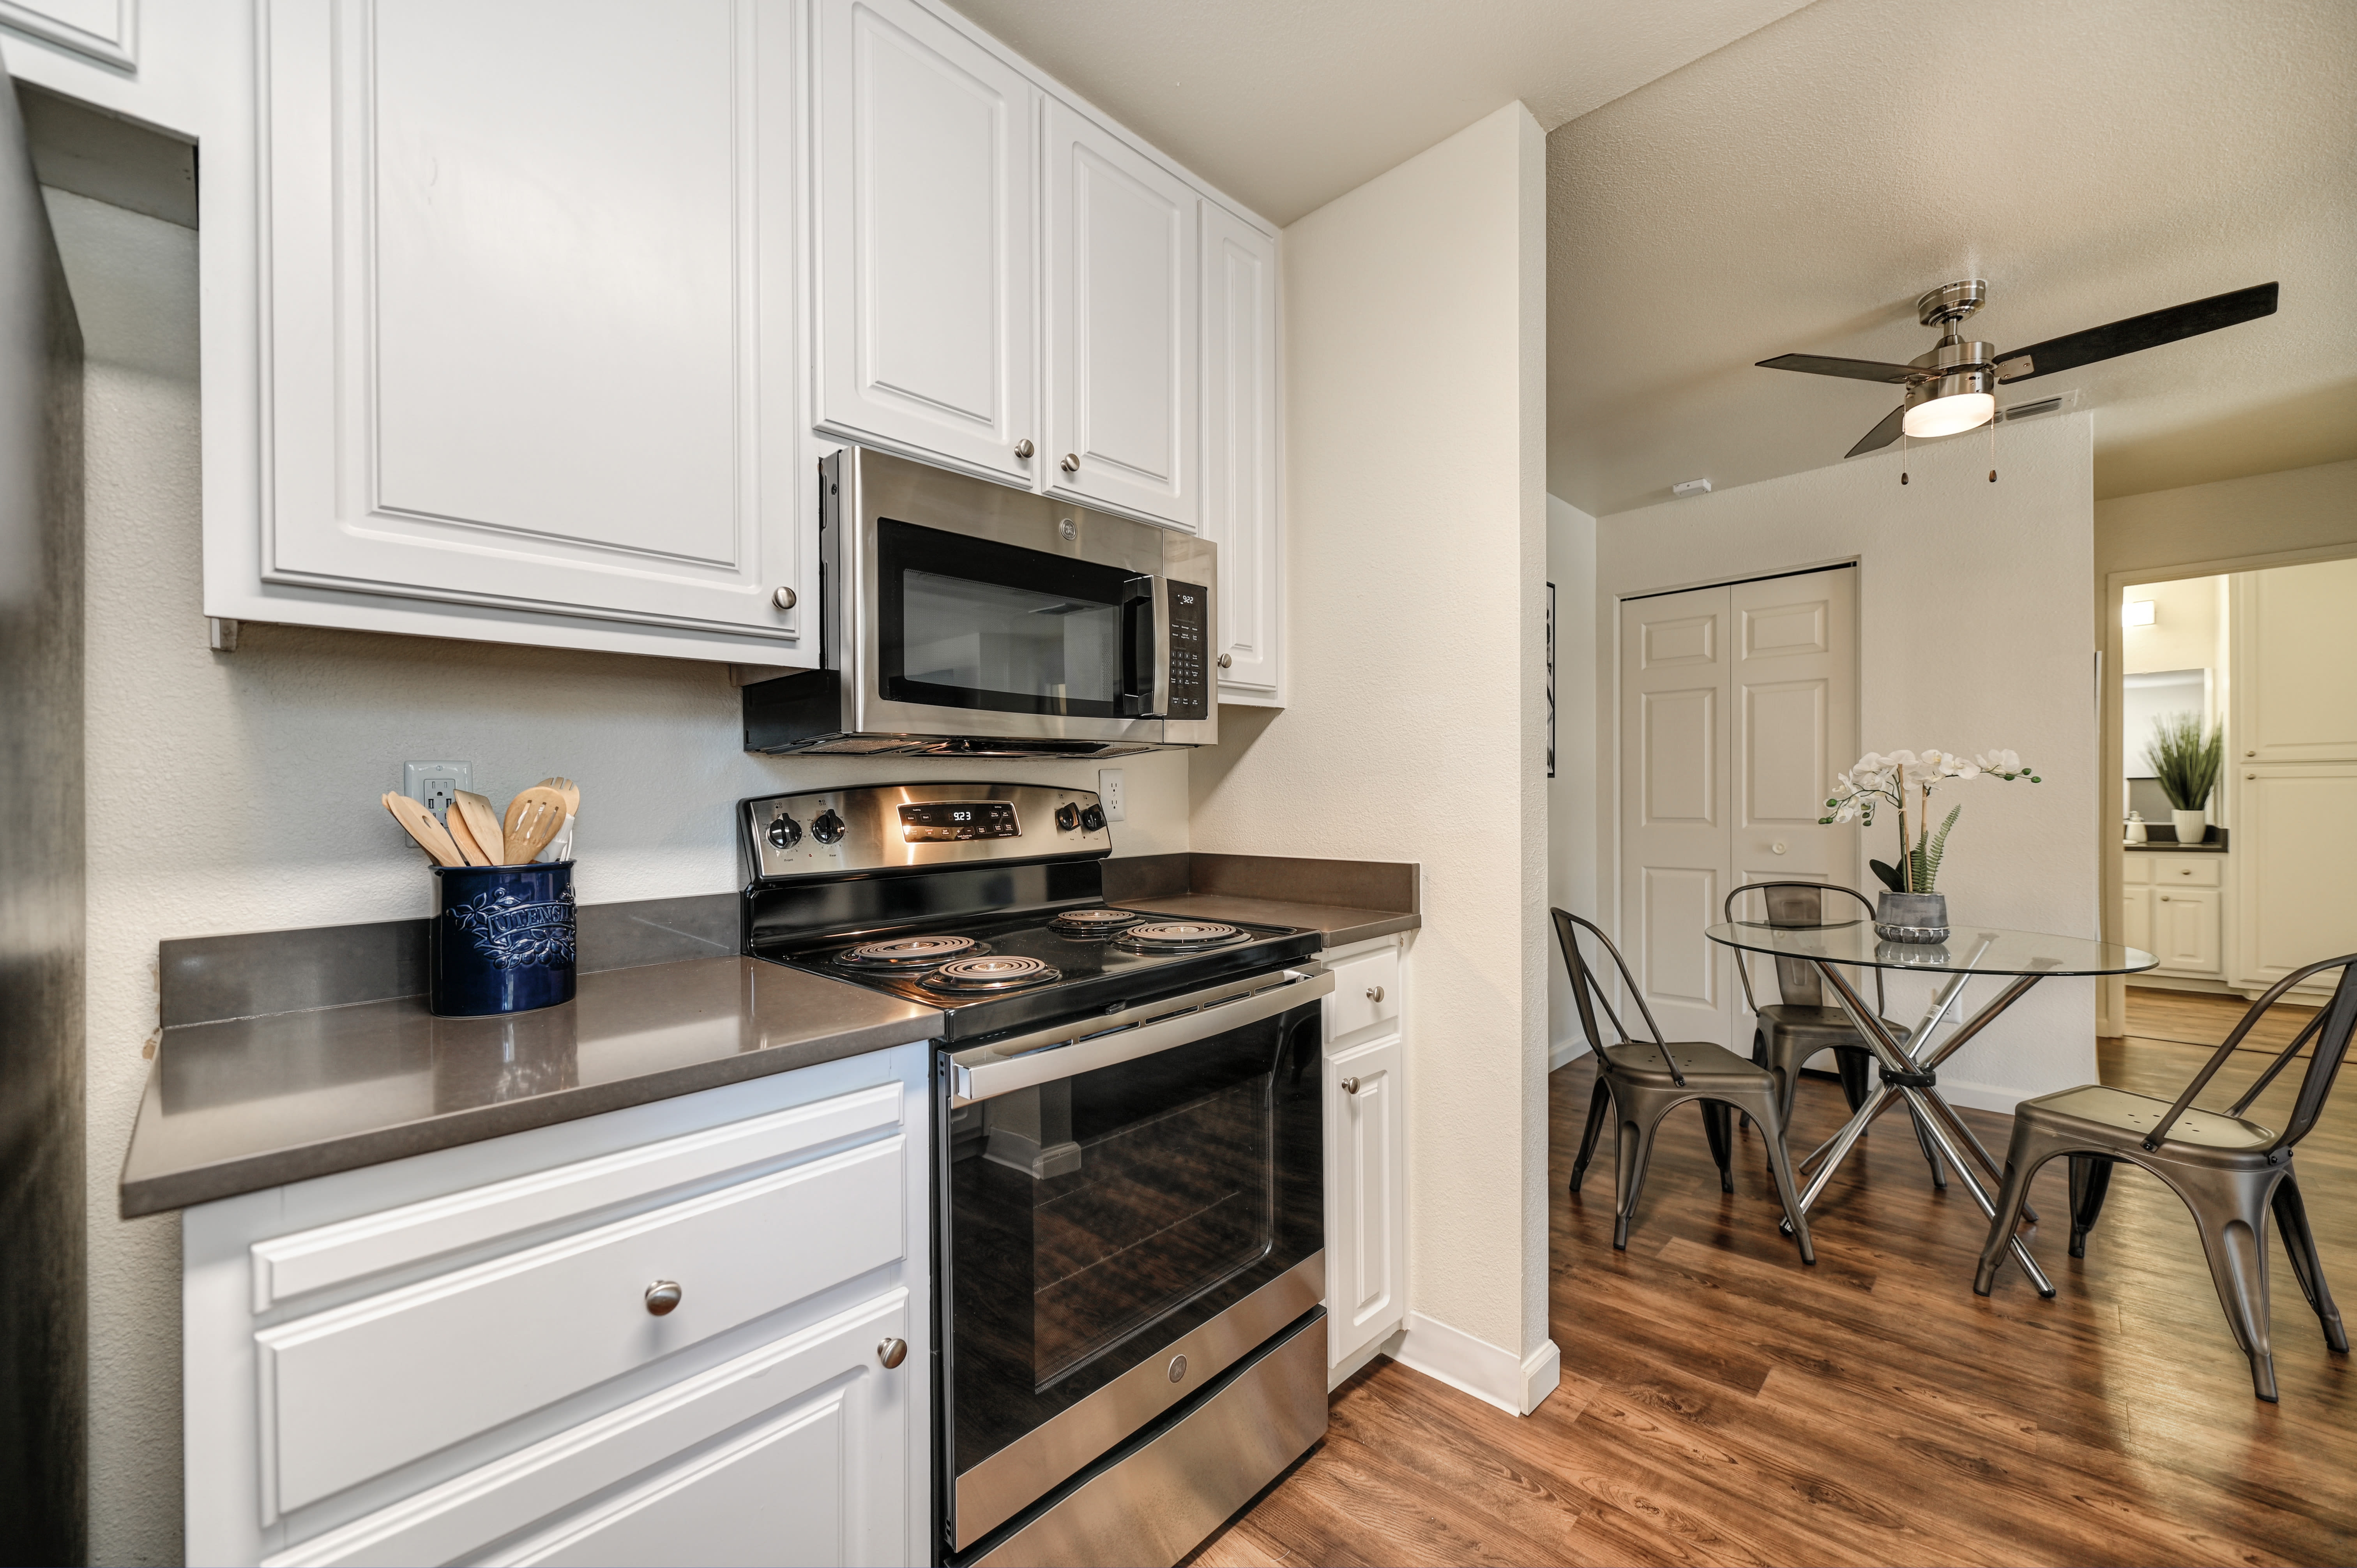 Model kitchen and dining room at Salishan Apartments in Citrus Heights, California